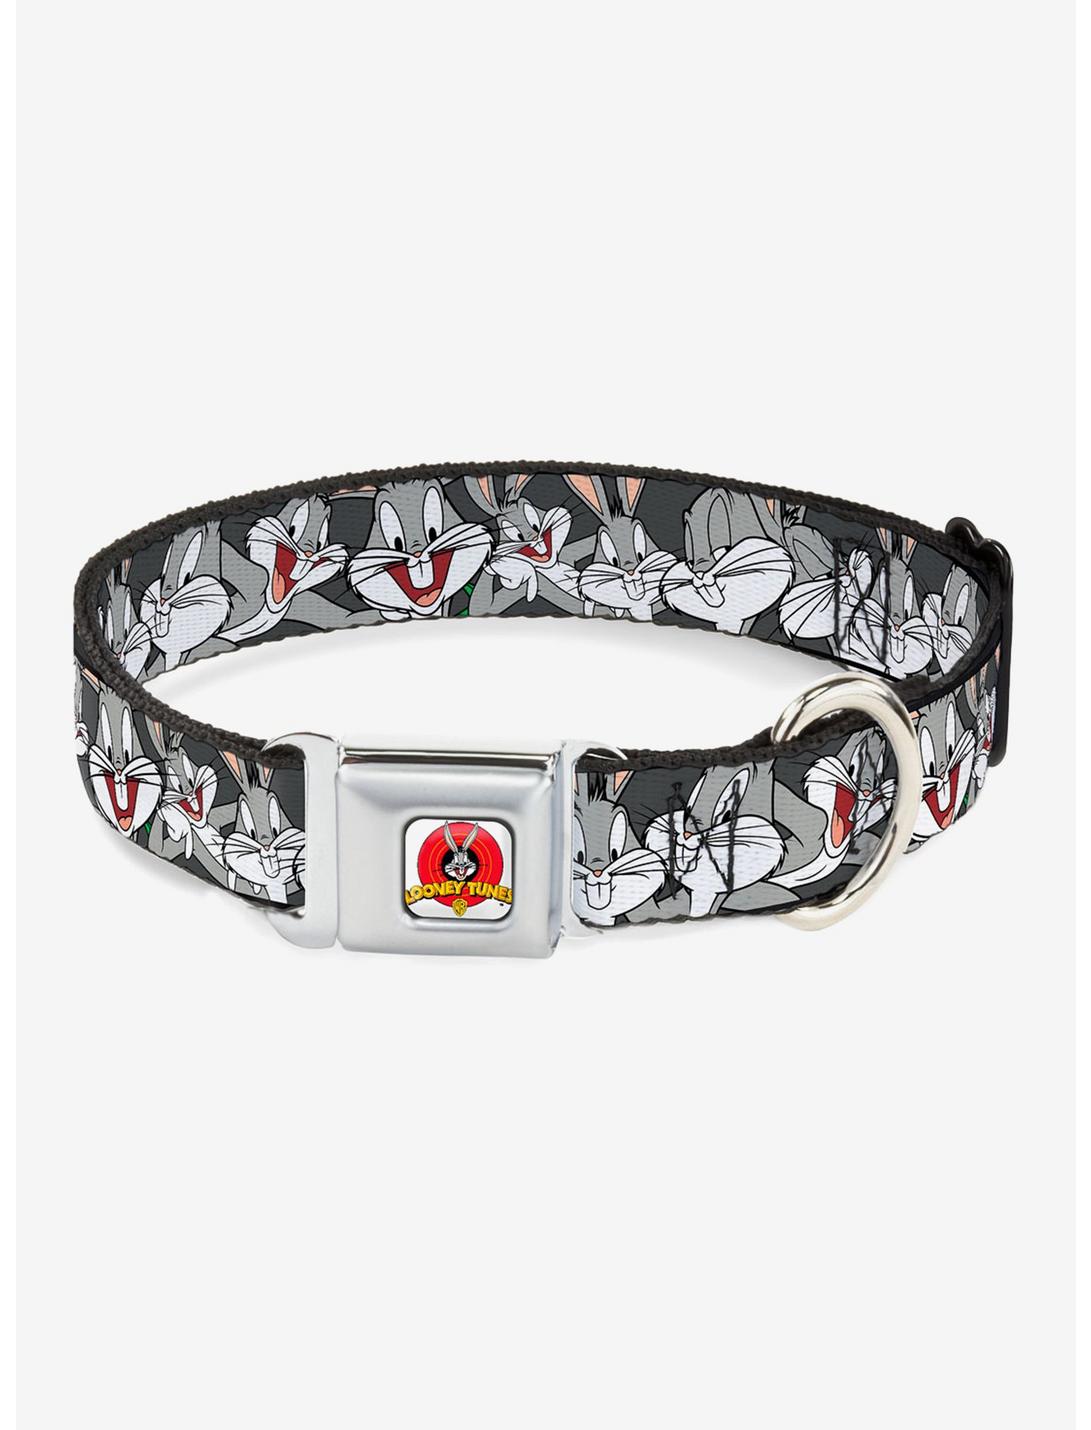 Looney Tunes Bugs Bunny Close Up Expressions Seatbelt Buckle Dog Collar, BLACK, hi-res